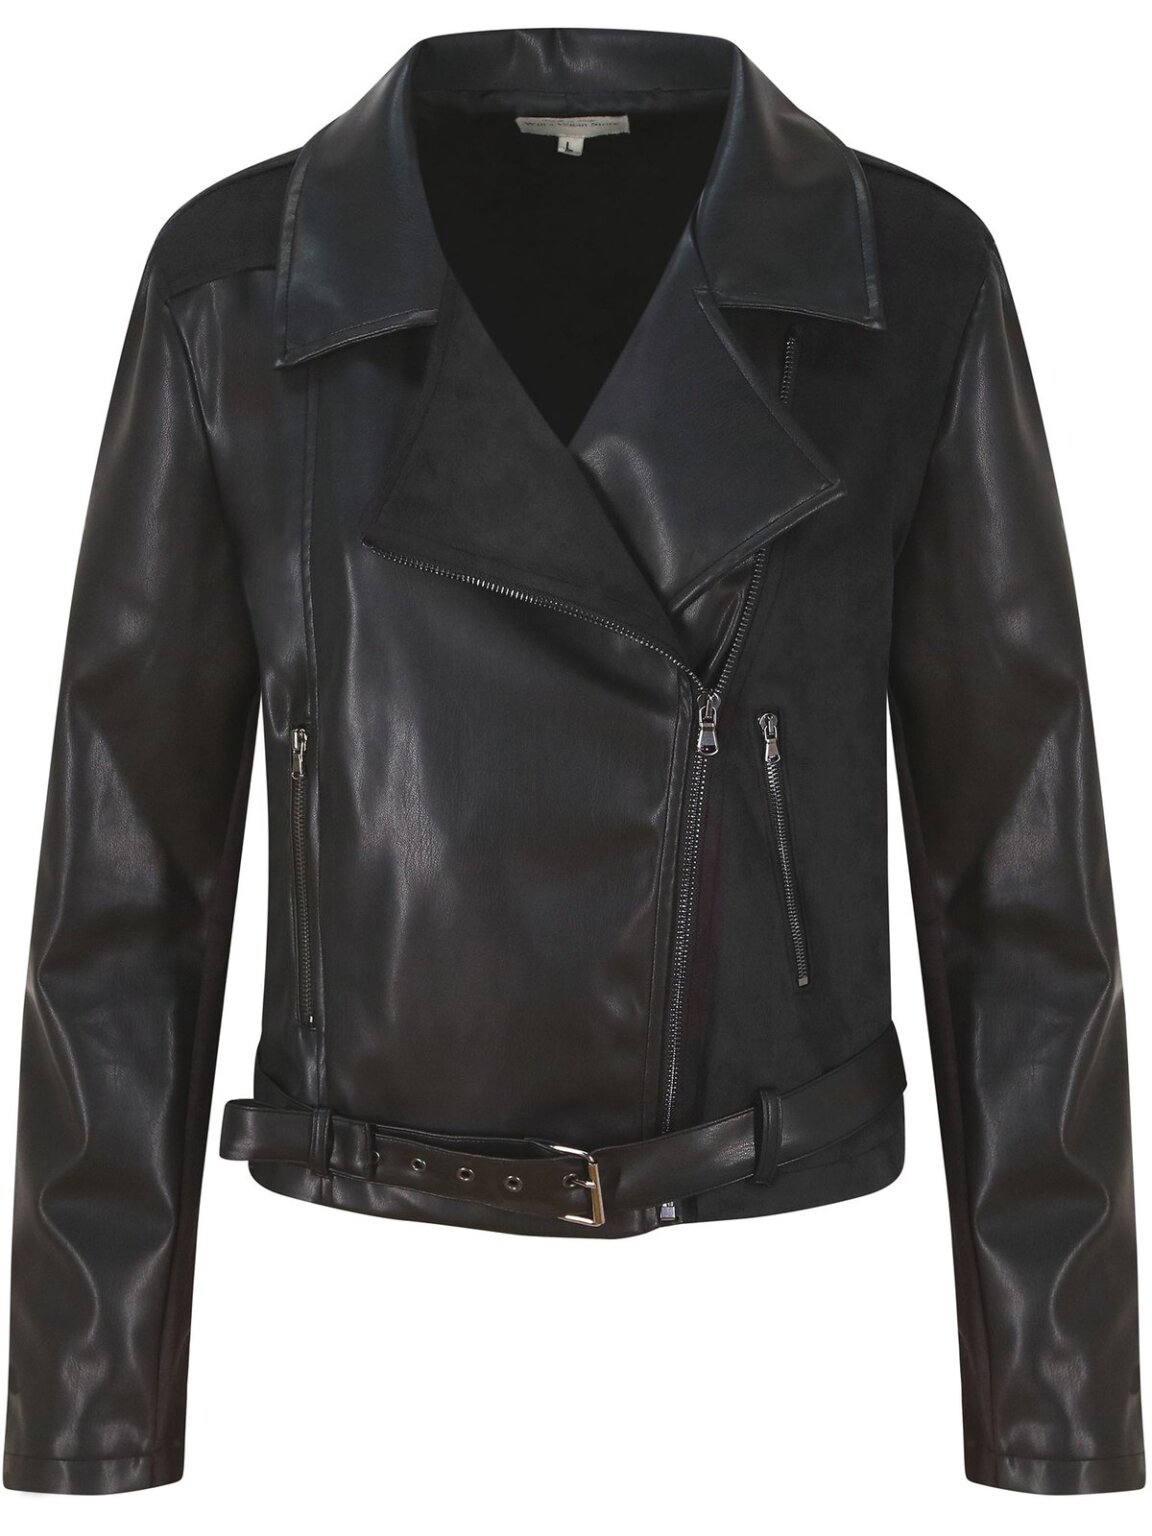 6 Cool AF Vegan Leather Jackets You Need in Your Wardrobe This Autumn ...